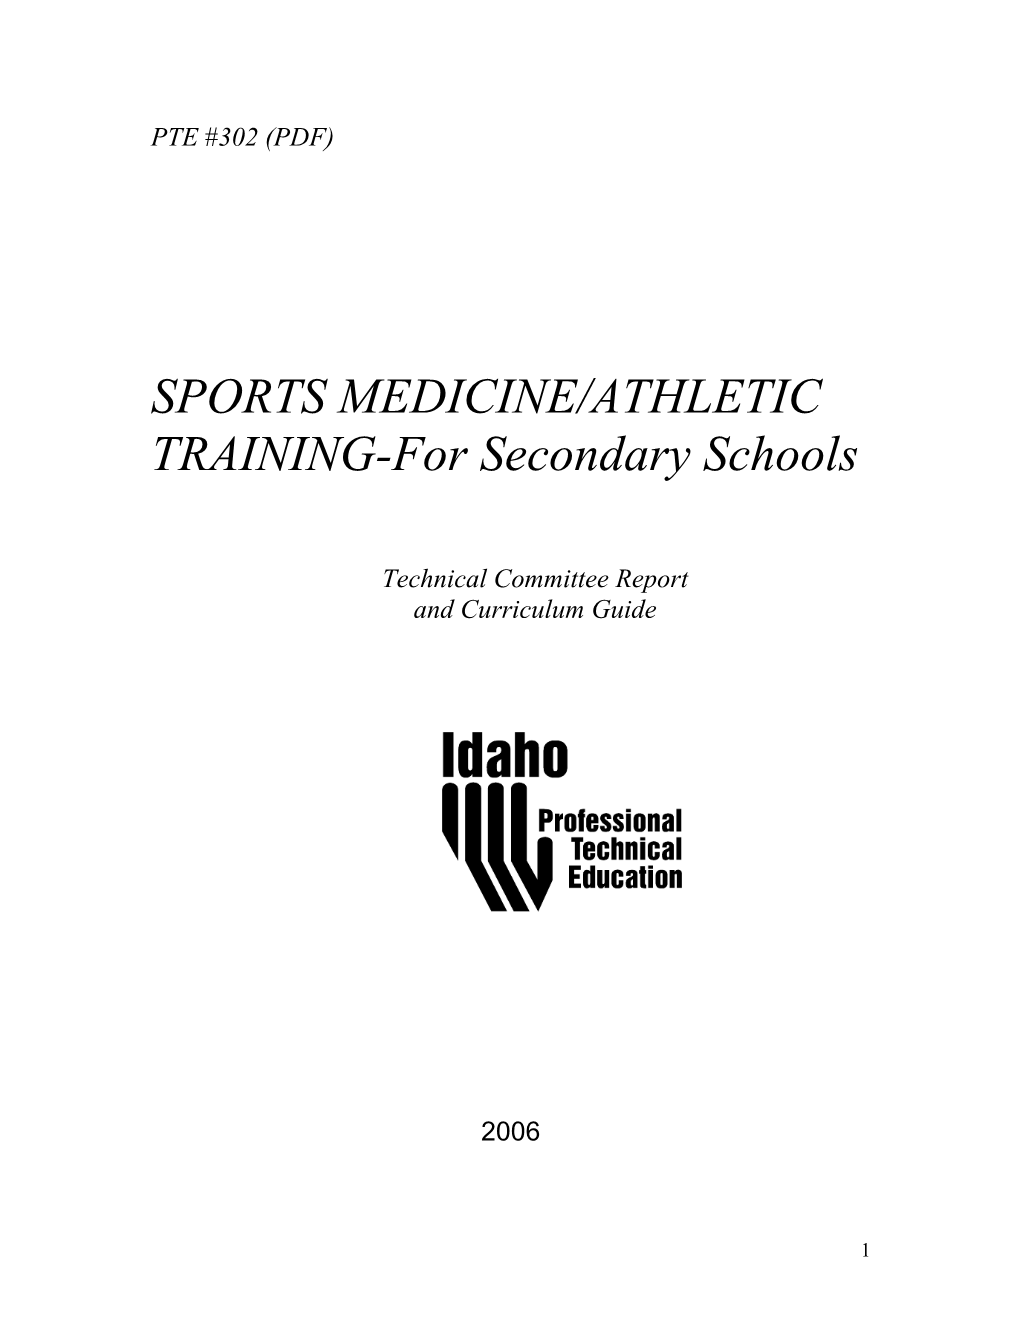 TRAINING-For Secondary Schools